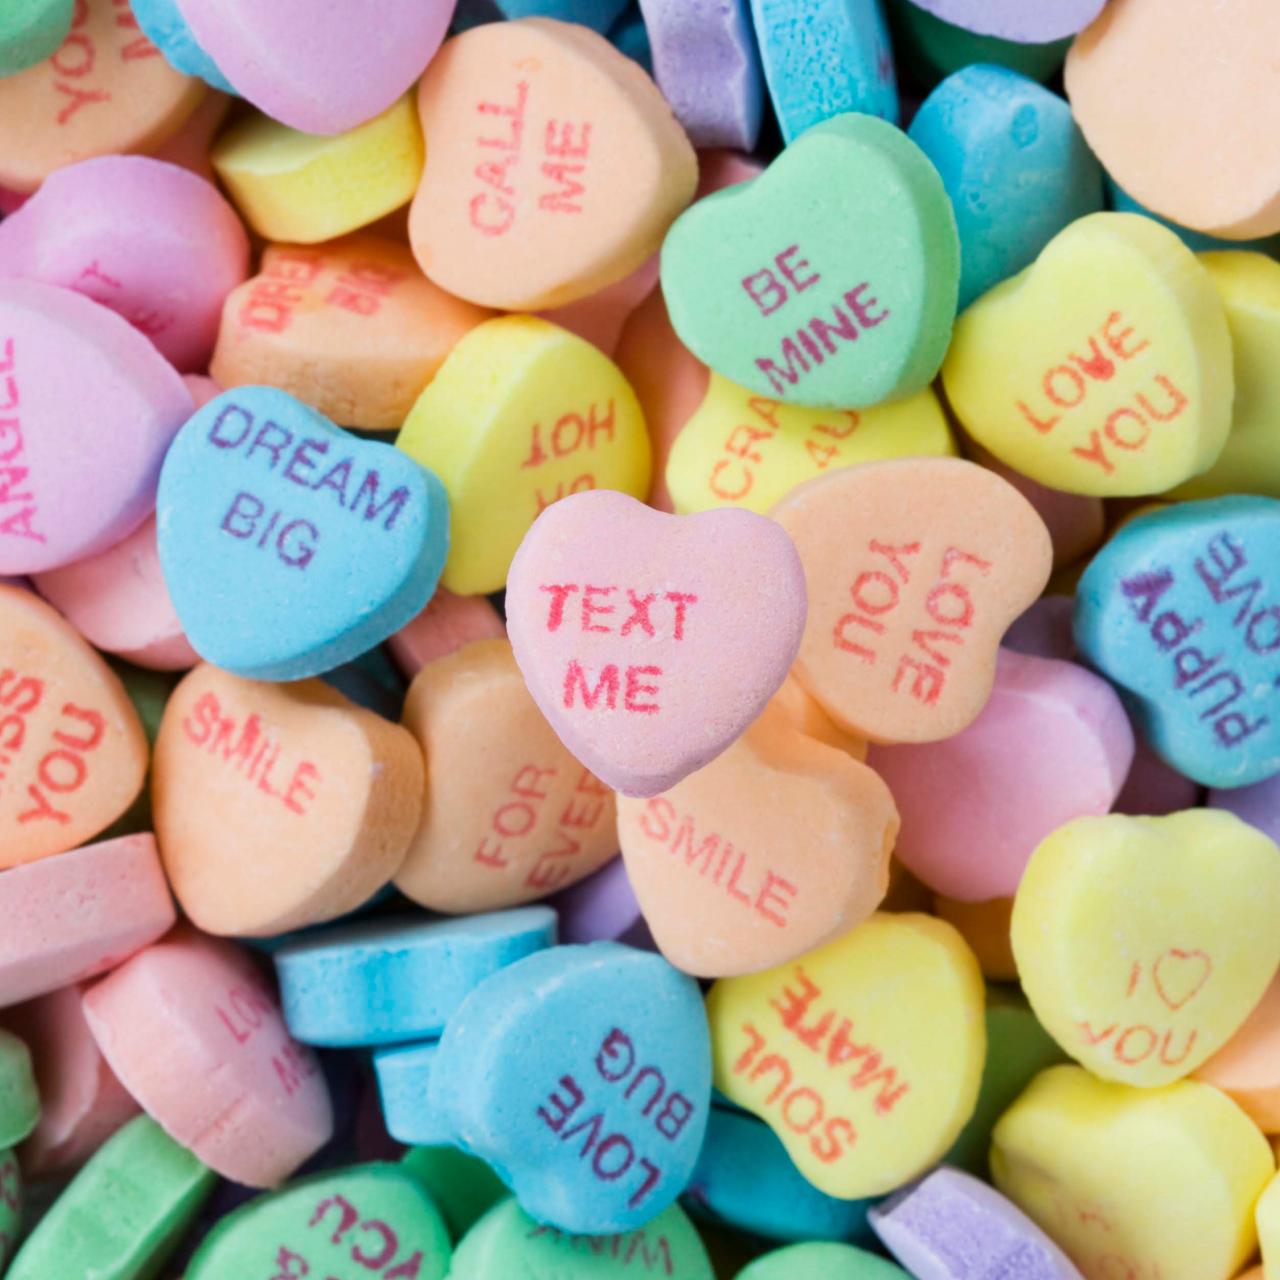 Sweethearts candy is back for Valentine's Day, but not without hiccups